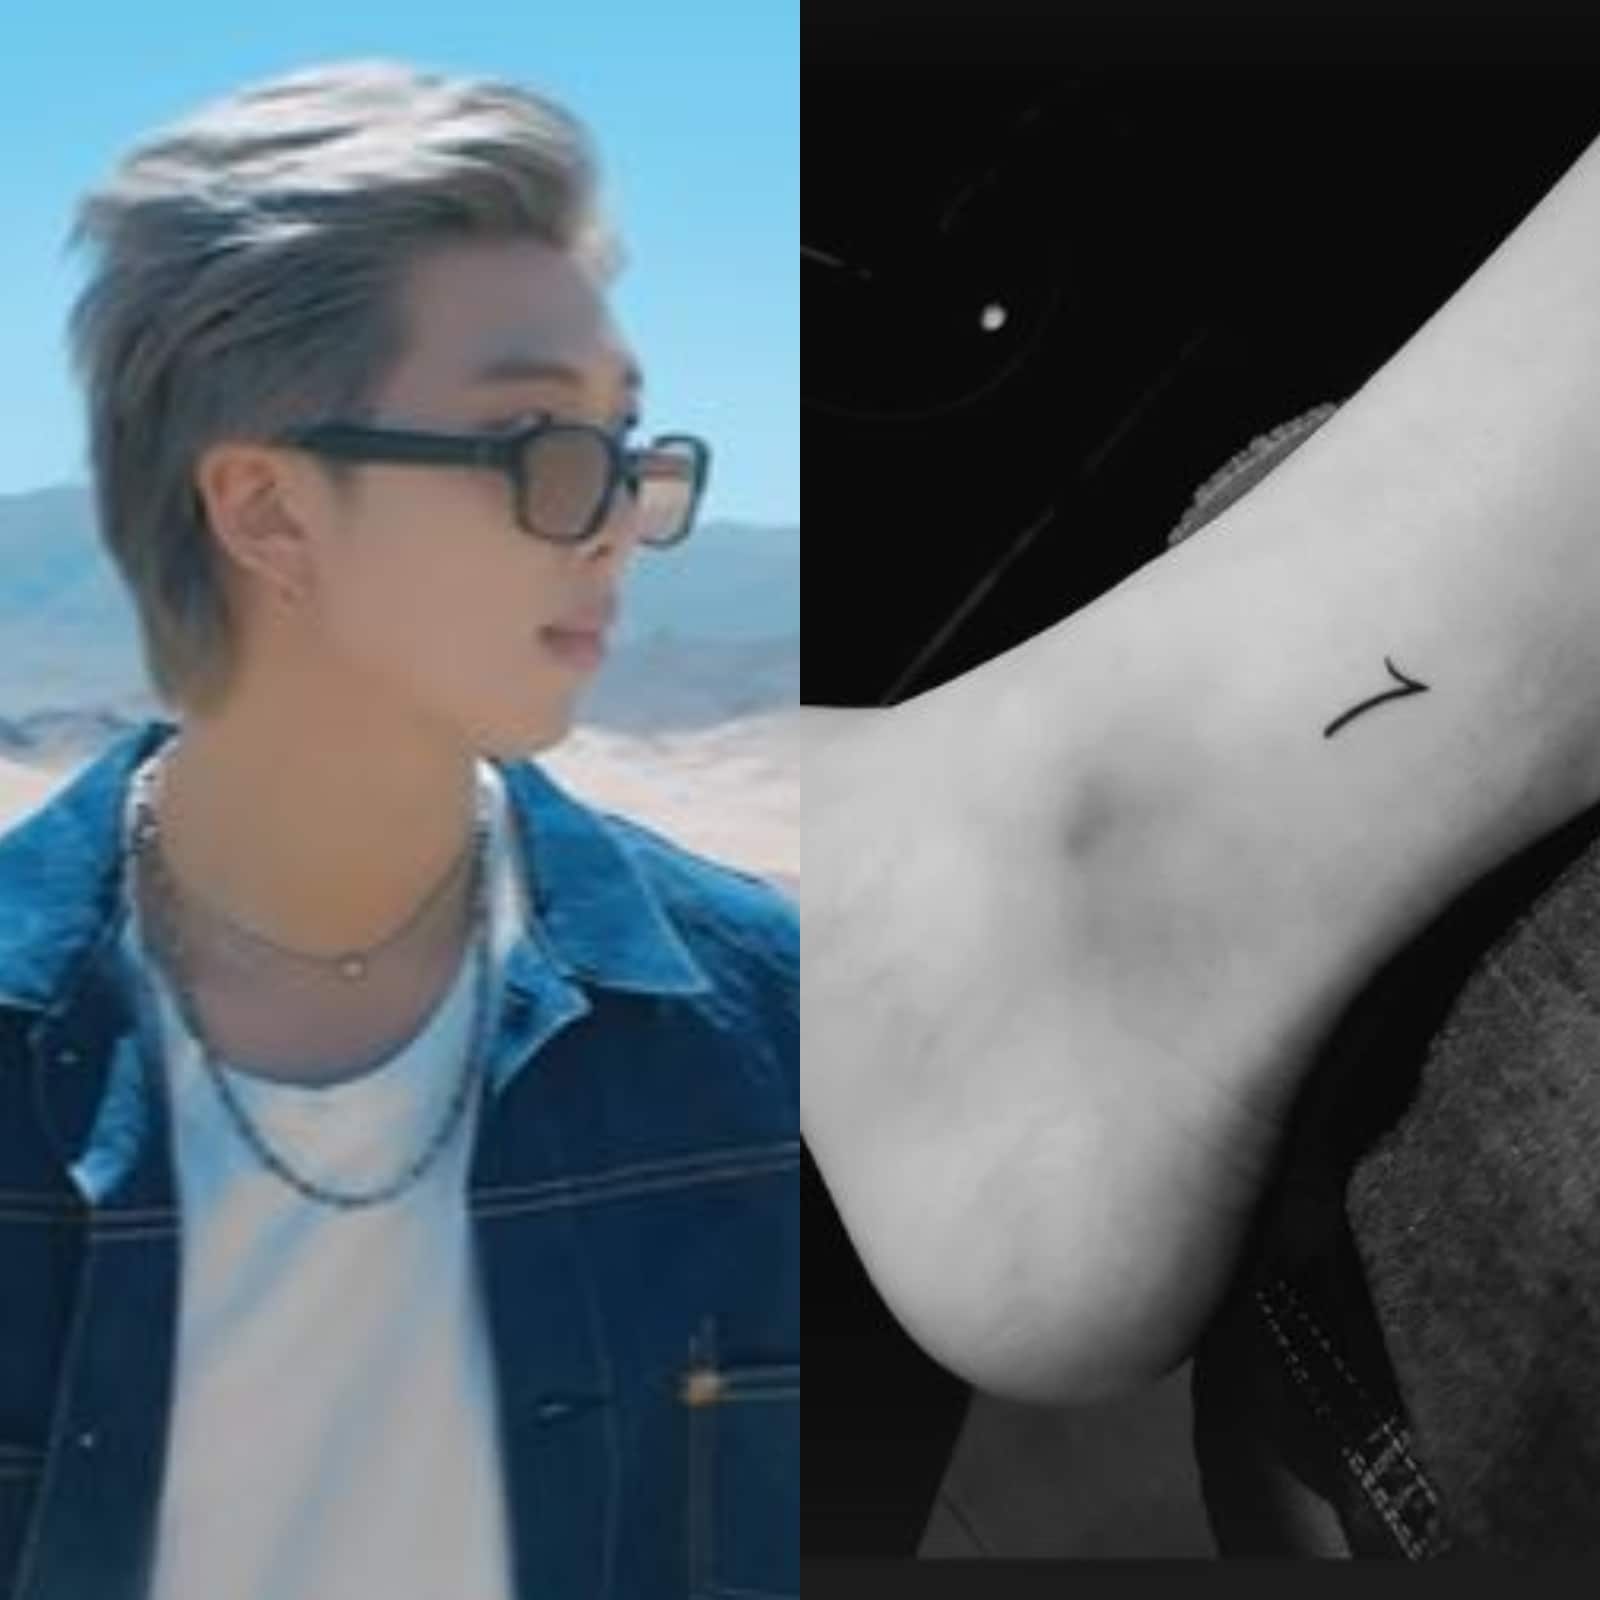 BTS Members Are Getting THESE Tattoos: Here's What We Know